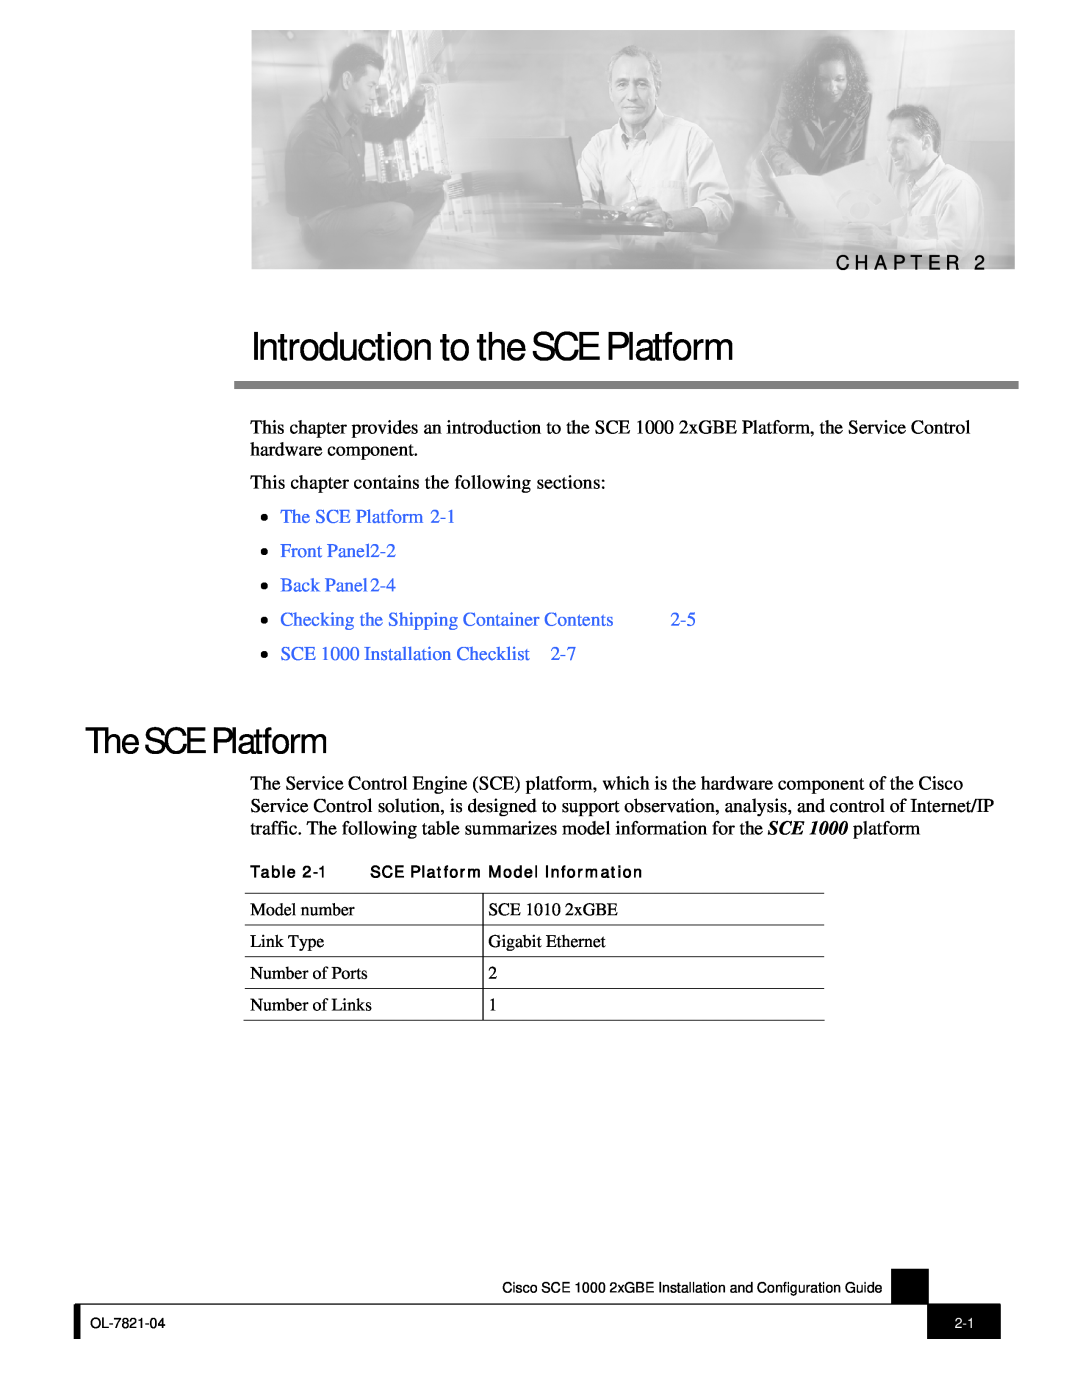 Cisco Systems SCE 1000 2xGBE Introduction to the SCE Platform, The SCE Platform Front Panel2-2 Back Panel, C H A P T E R 